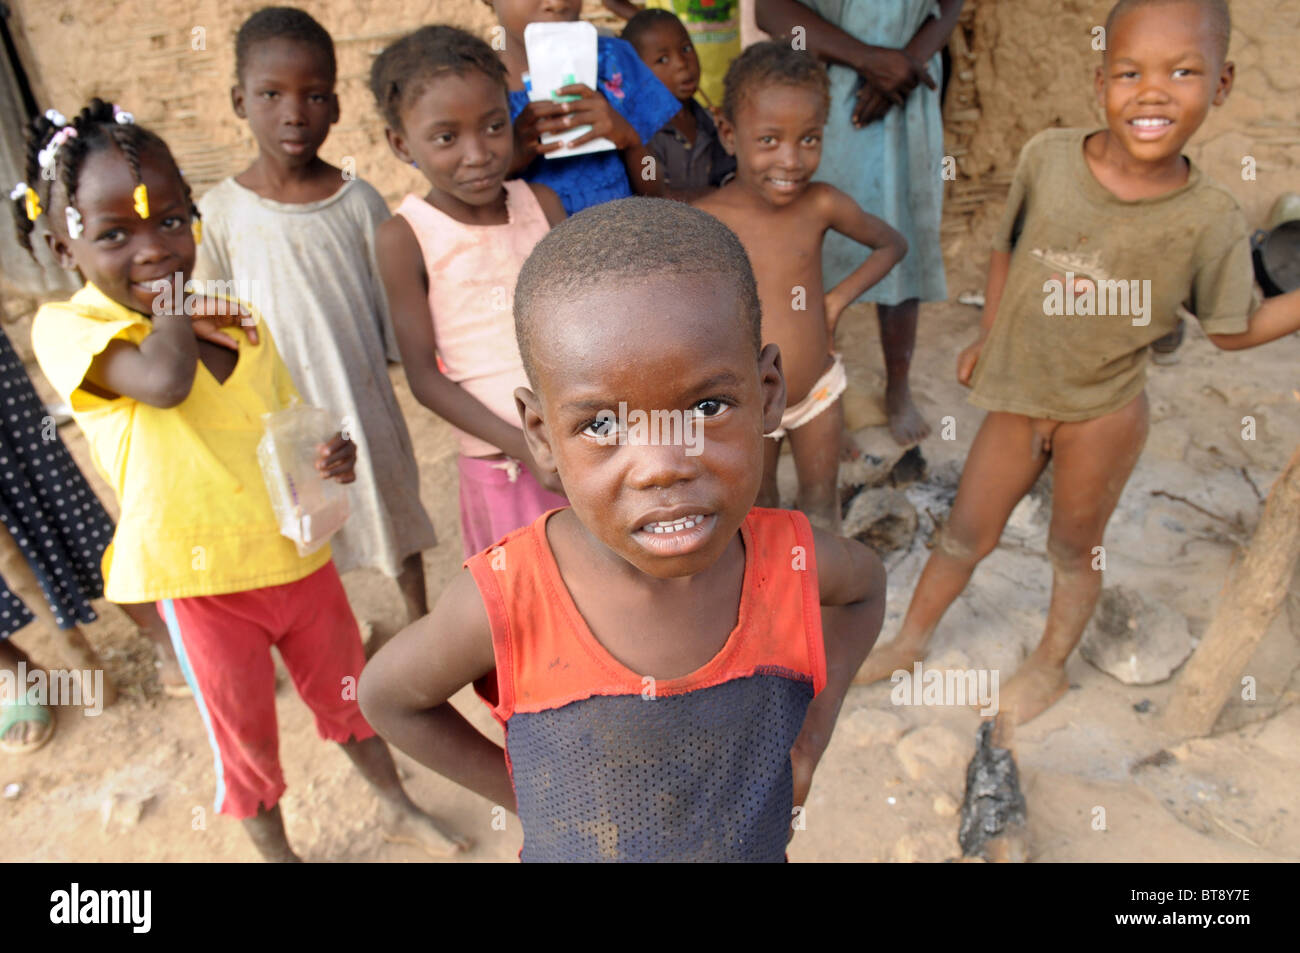 Group of 6-10 year old Haitian children Stock Photo